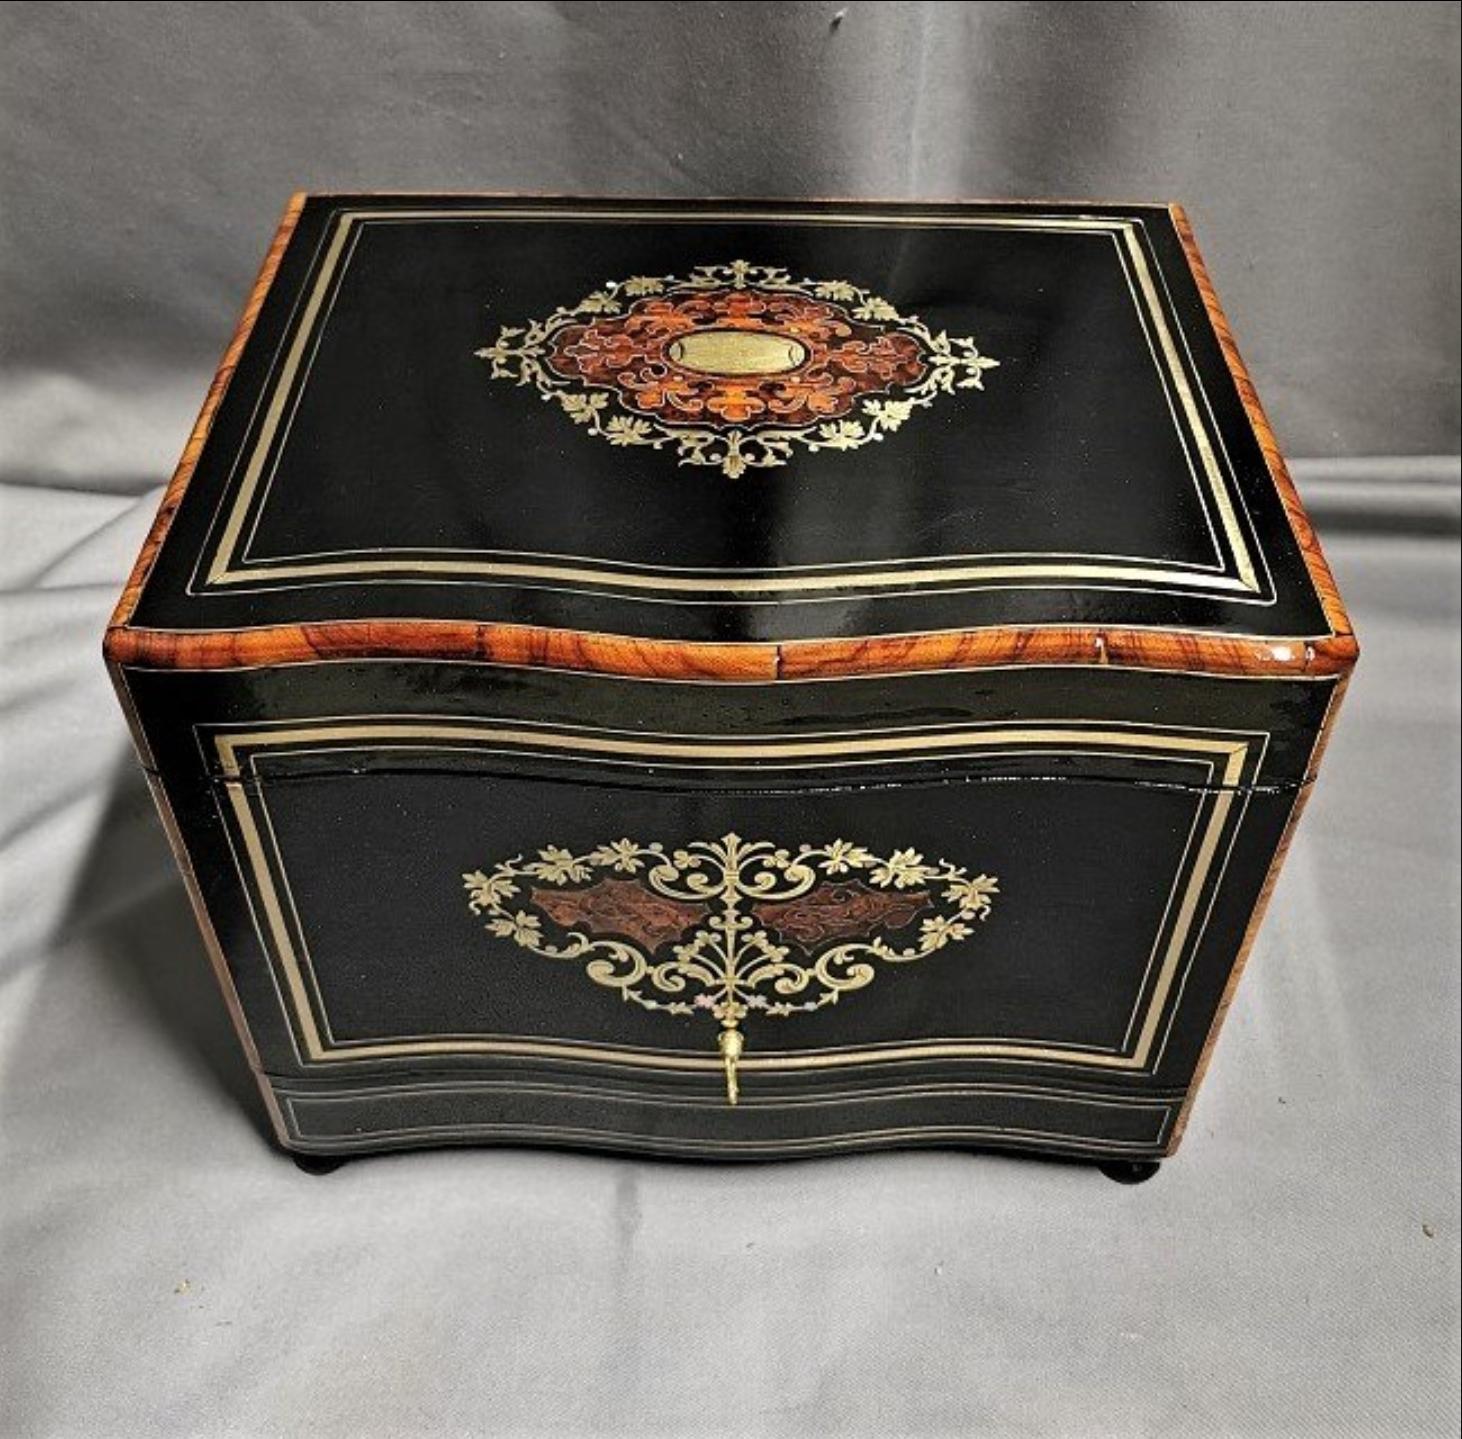 Napoleon III liquor cellar in Boulle style marquetry made in fruitwood, brass and tin marquetry in a blackened pearwood base. Beautiful cartridges on the hood and the front. Interior with a removable servant garnished with 4 decanters and 16